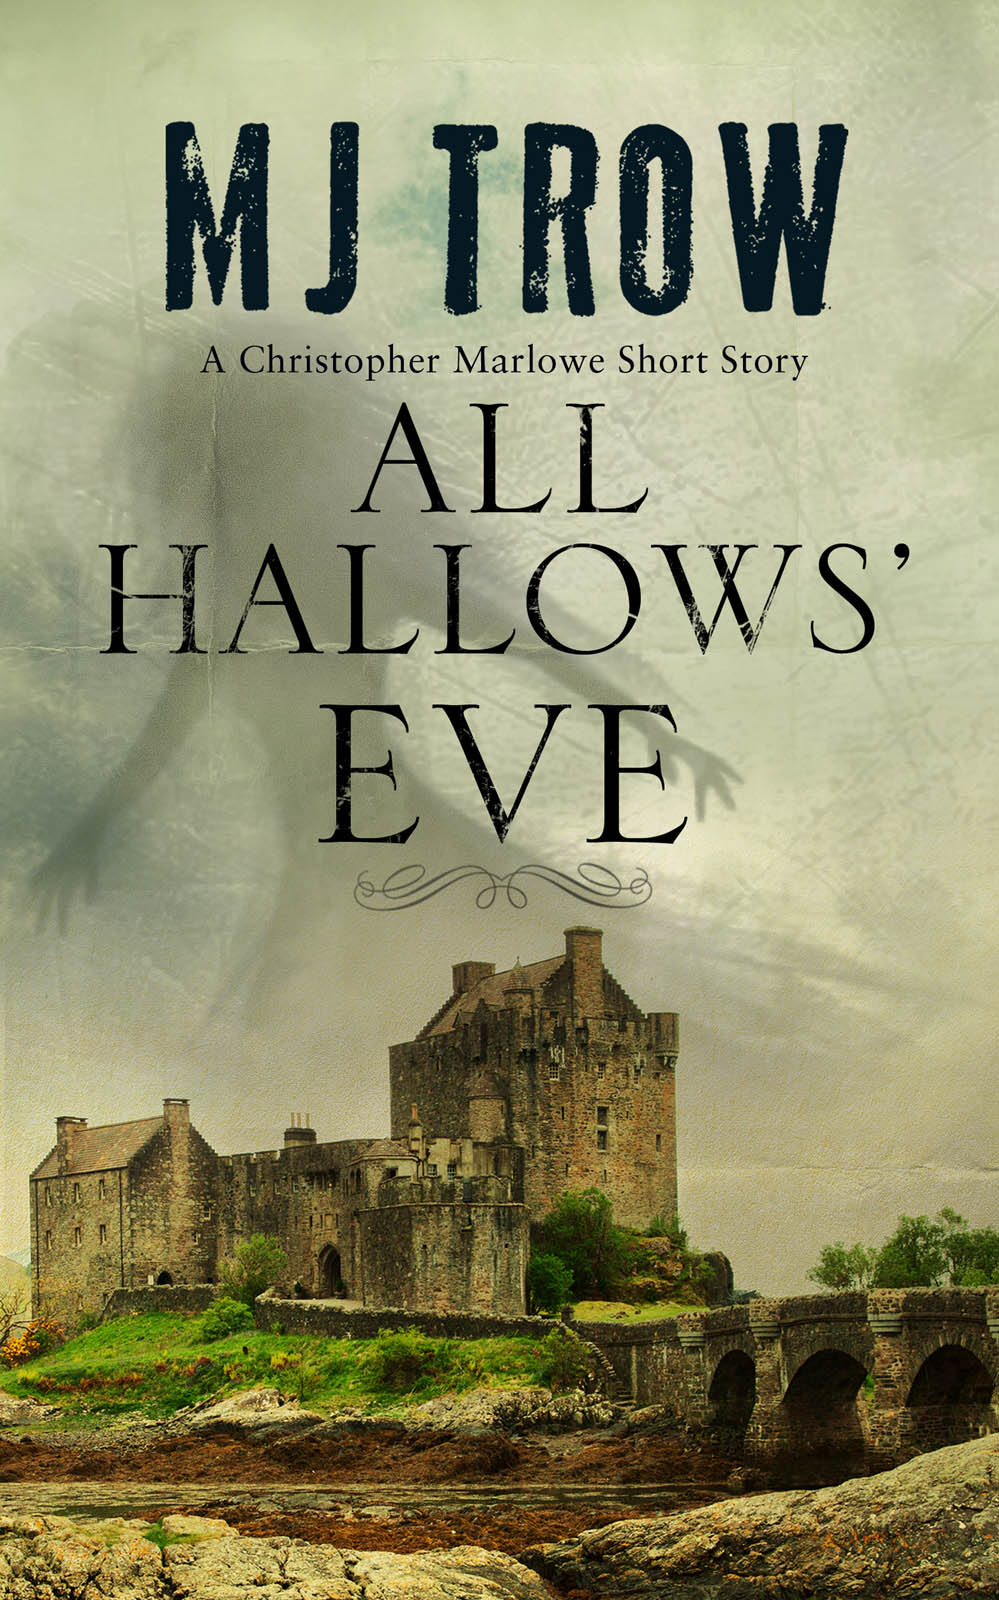 All Hallows' Eve (2015) by M.J. Trow